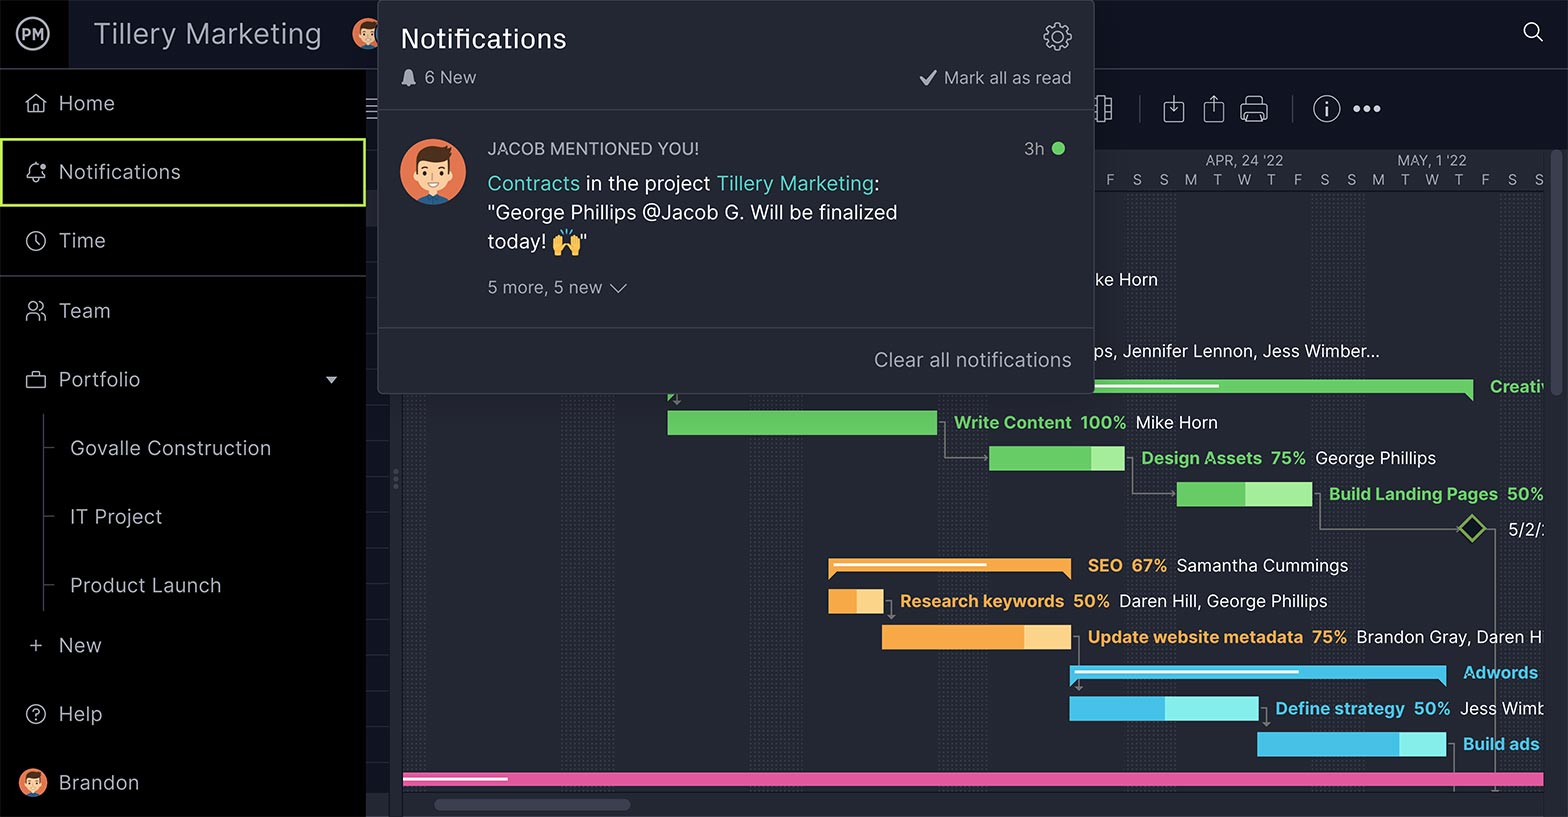 ProjectManager offers collaboration tools for scrum ceremonies, such as this real-time chat